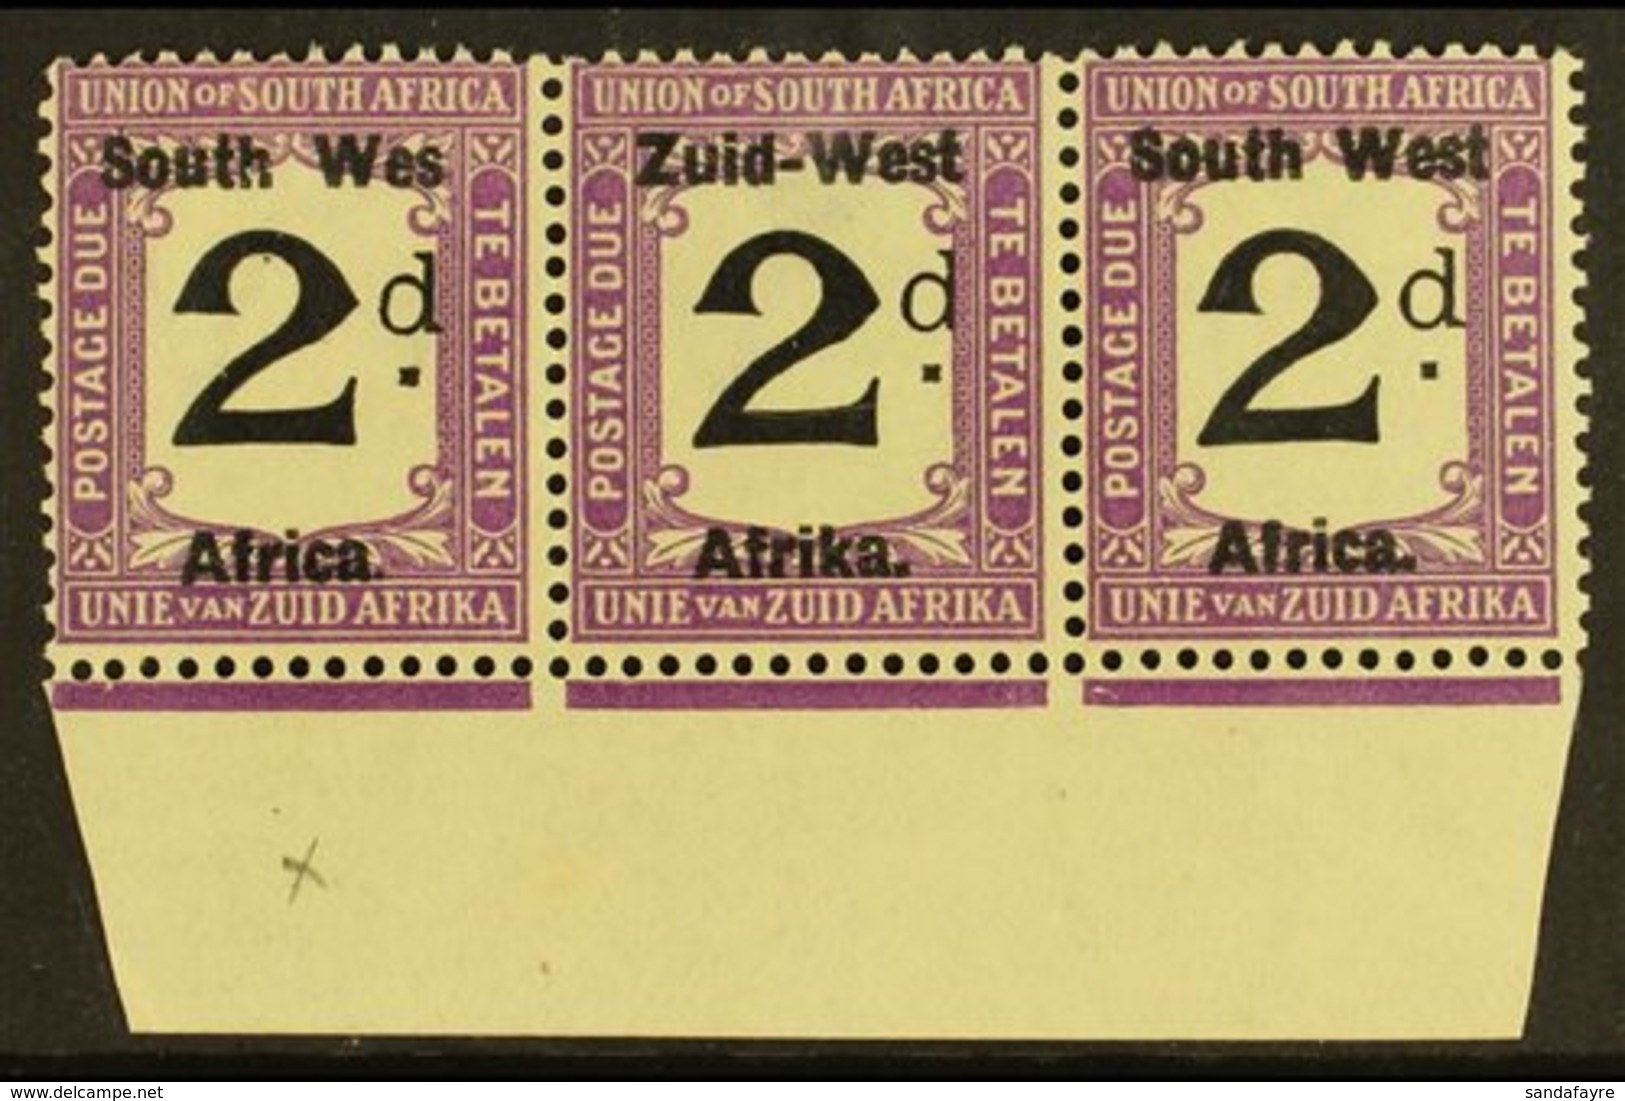 POSTAGE DUES  1923 2d Black And Violet, Marginal Strip Of 3, One Showing Variety "Wes For West", SG D3a, Very Fine NHM.  - South West Africa (1923-1990)